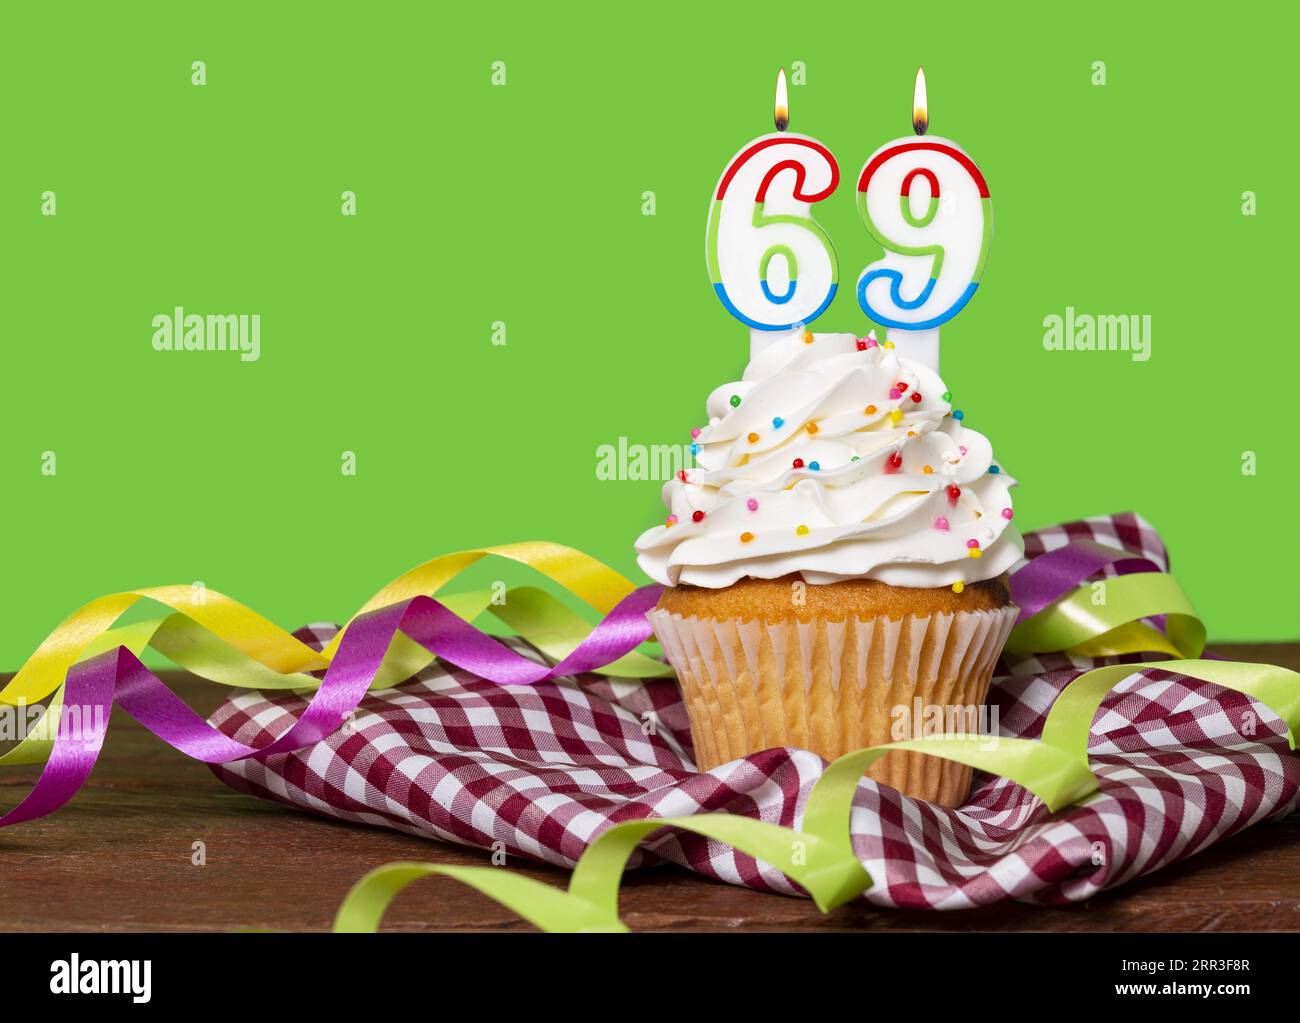 Cupcake With Number For Birthday Or Anniversary Celebration; Number 69. Stock Photo